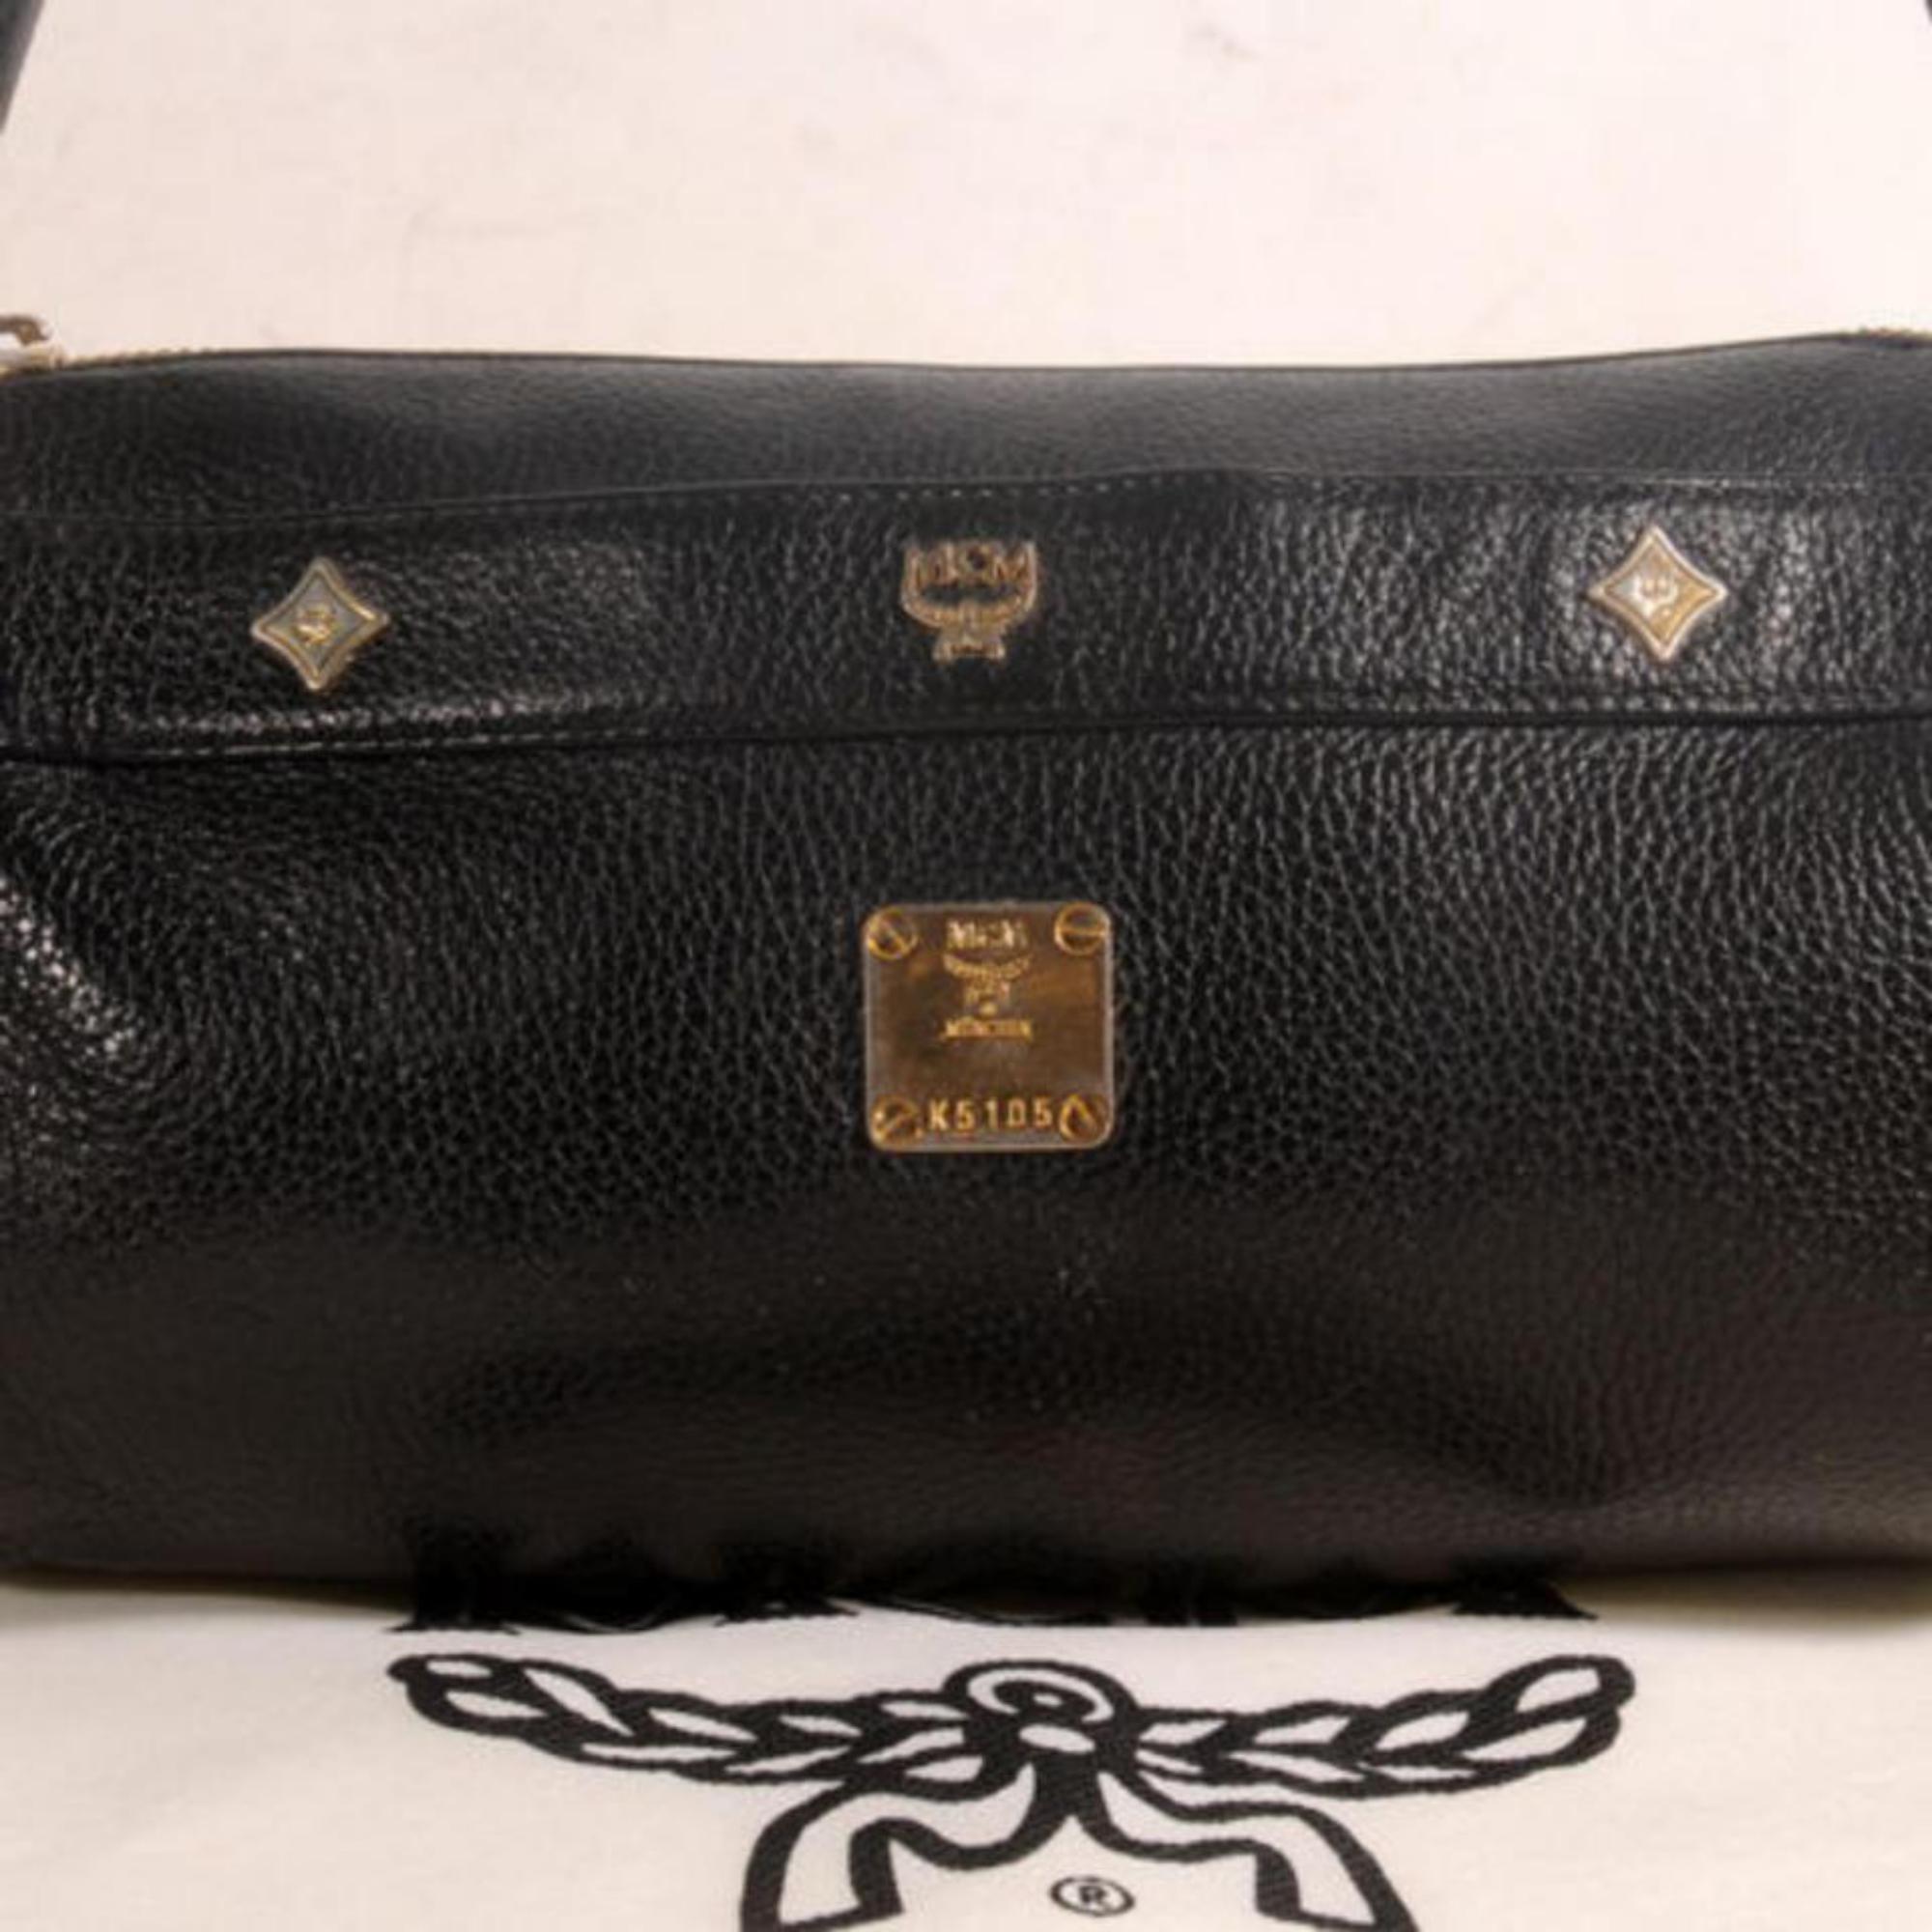 VERY GOOD VINTAGE CONDITION
(7/10 or B)
Includes Dust Bag
This item does not come with any extra accessories.
Please review photos for more details.
Color appearance may vary depending on your monitor settings.
SKU : 868837